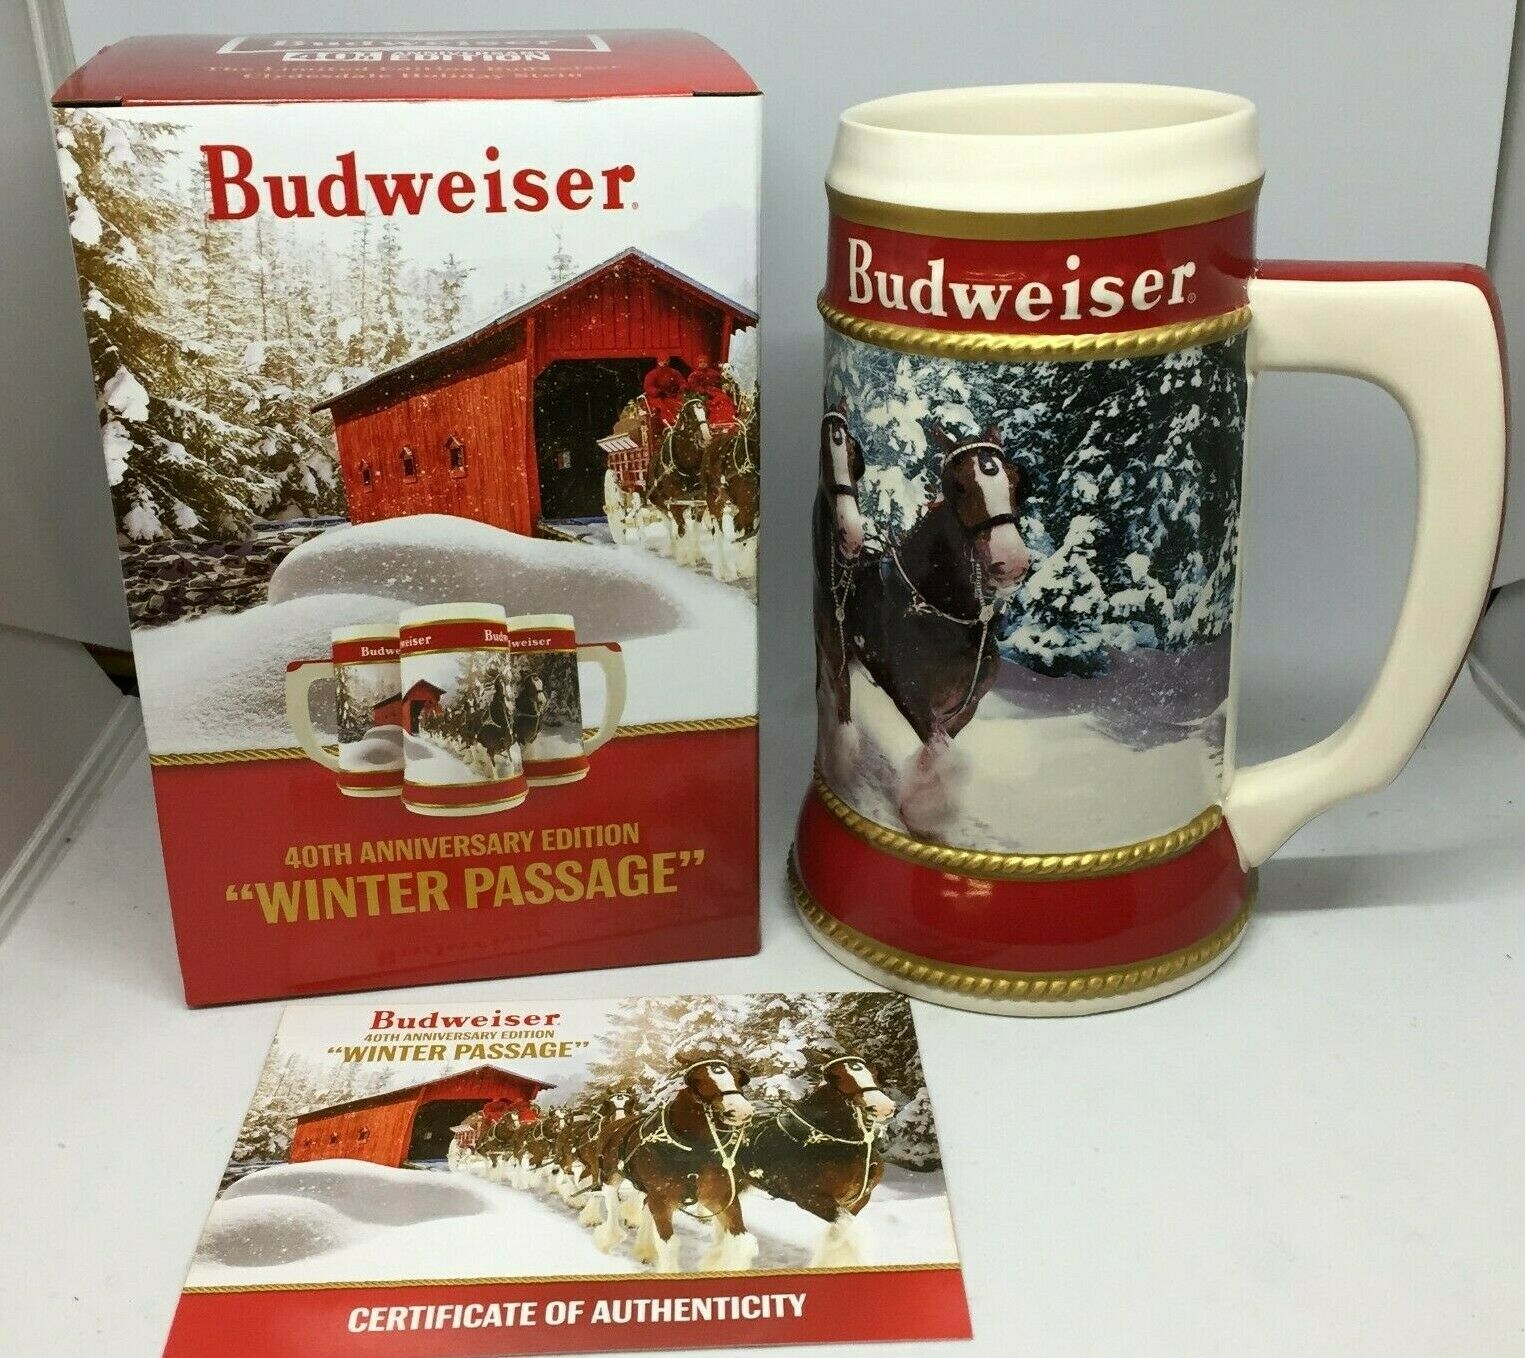 2019 Budweiser Holiday Stein Beer Mug Frm Annual Christmas Series Winter Passage